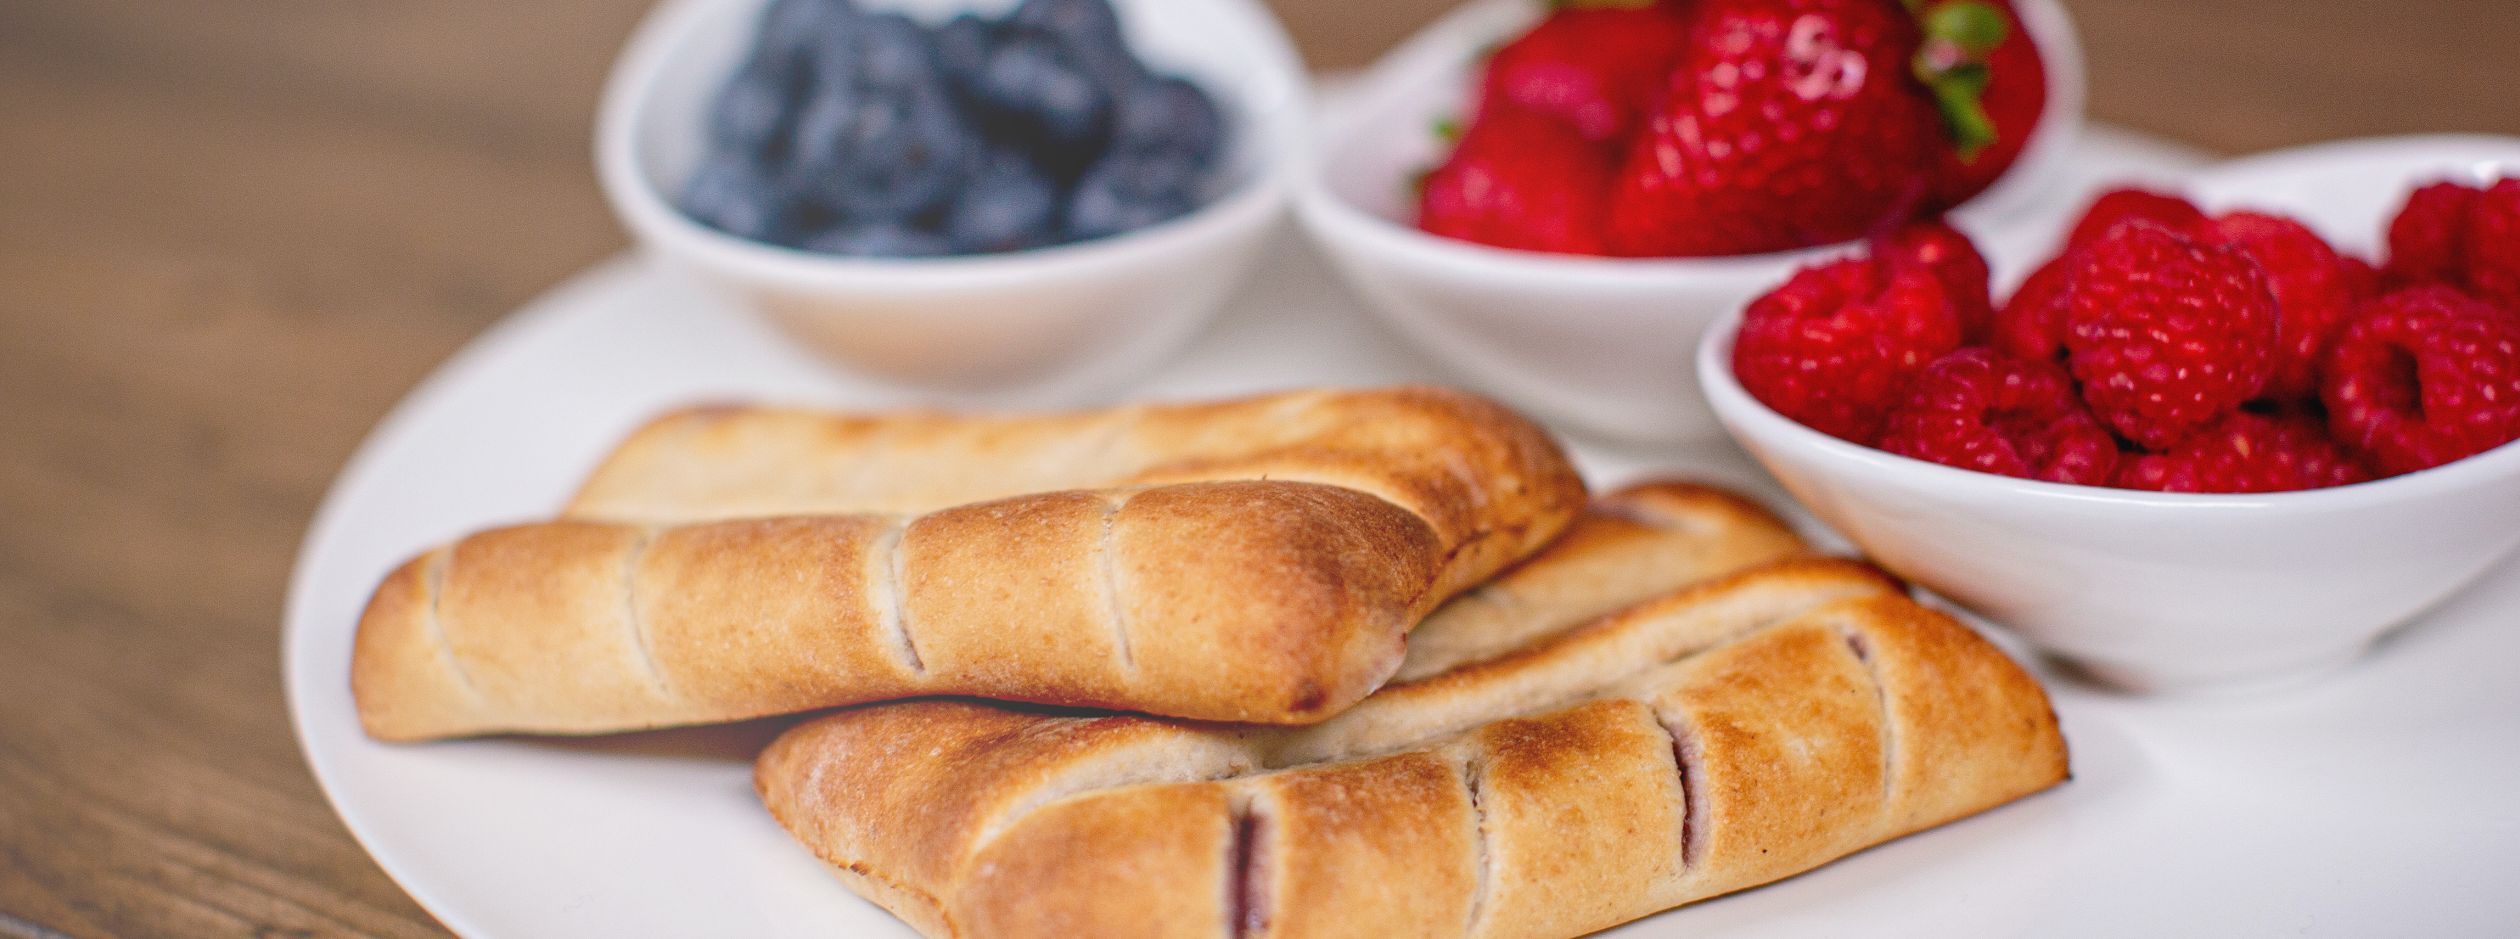 Berries & Cream Twin Breadstick Pastry with 3 side dishes: blueberries, strawberries and rasberries